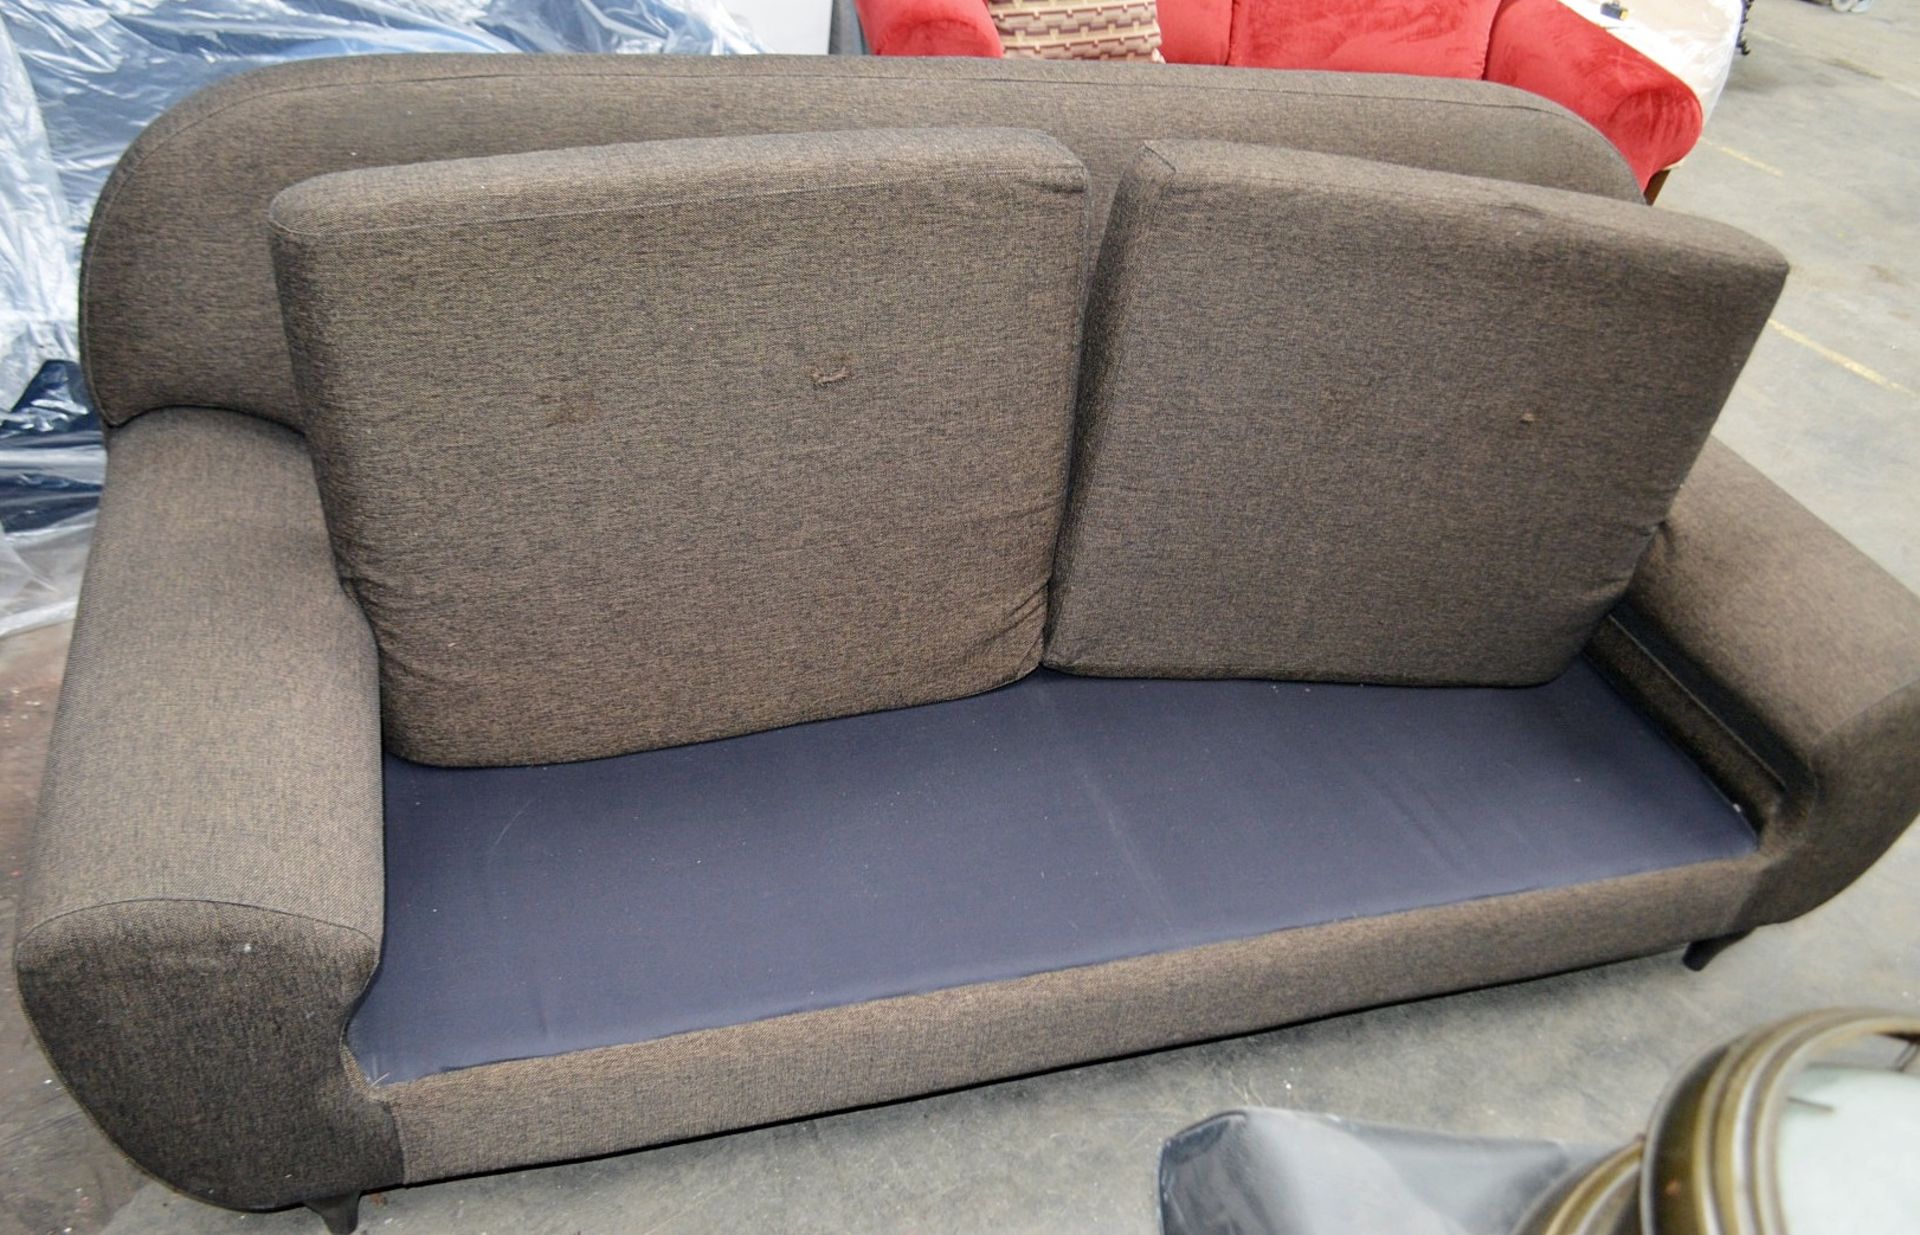 1 x Large Commercial 2-Metre Long Contemporary Sofa In A  Dark Brown/Bronze Woven Fabric - - Image 4 of 6